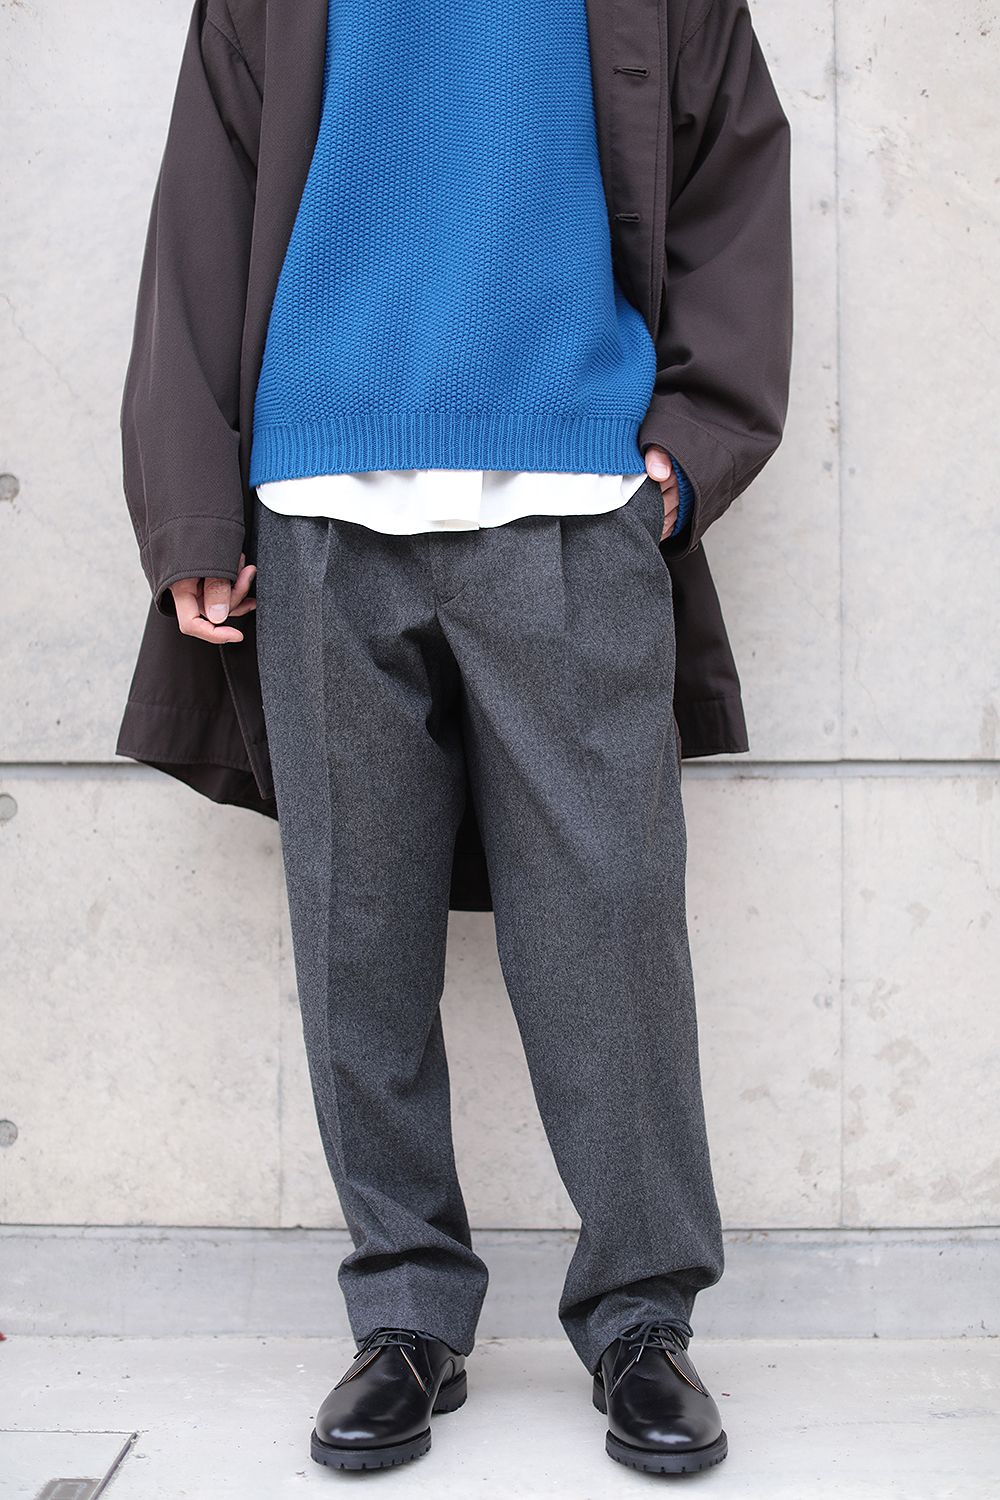 WEWILL - 【ラスト1点】2TUCK DRESS TROUSERS(GRAY) | Acacia ONLINESTORE